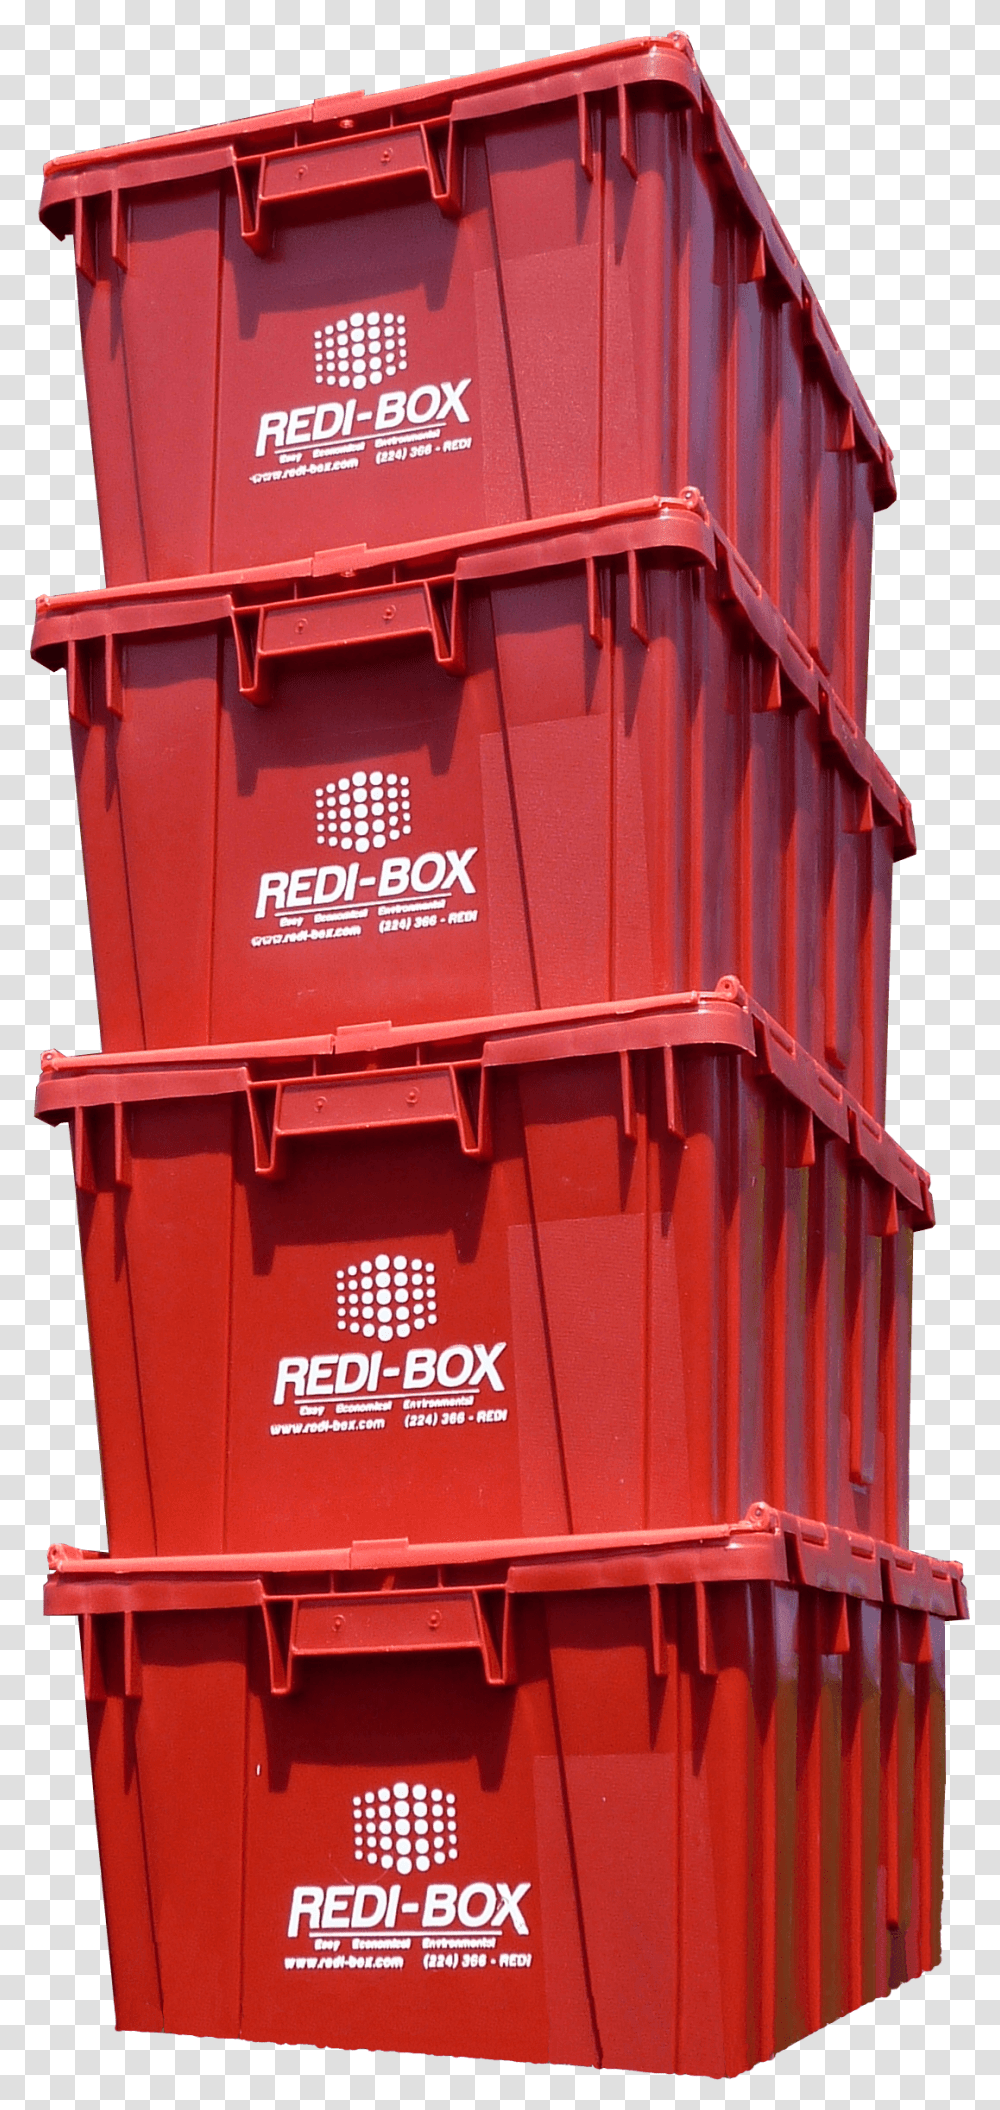 Moving Boxes In Chicago Rolling Stock, Postbox, Mailbox, Public Mailbox, Letterbox Transparent Png